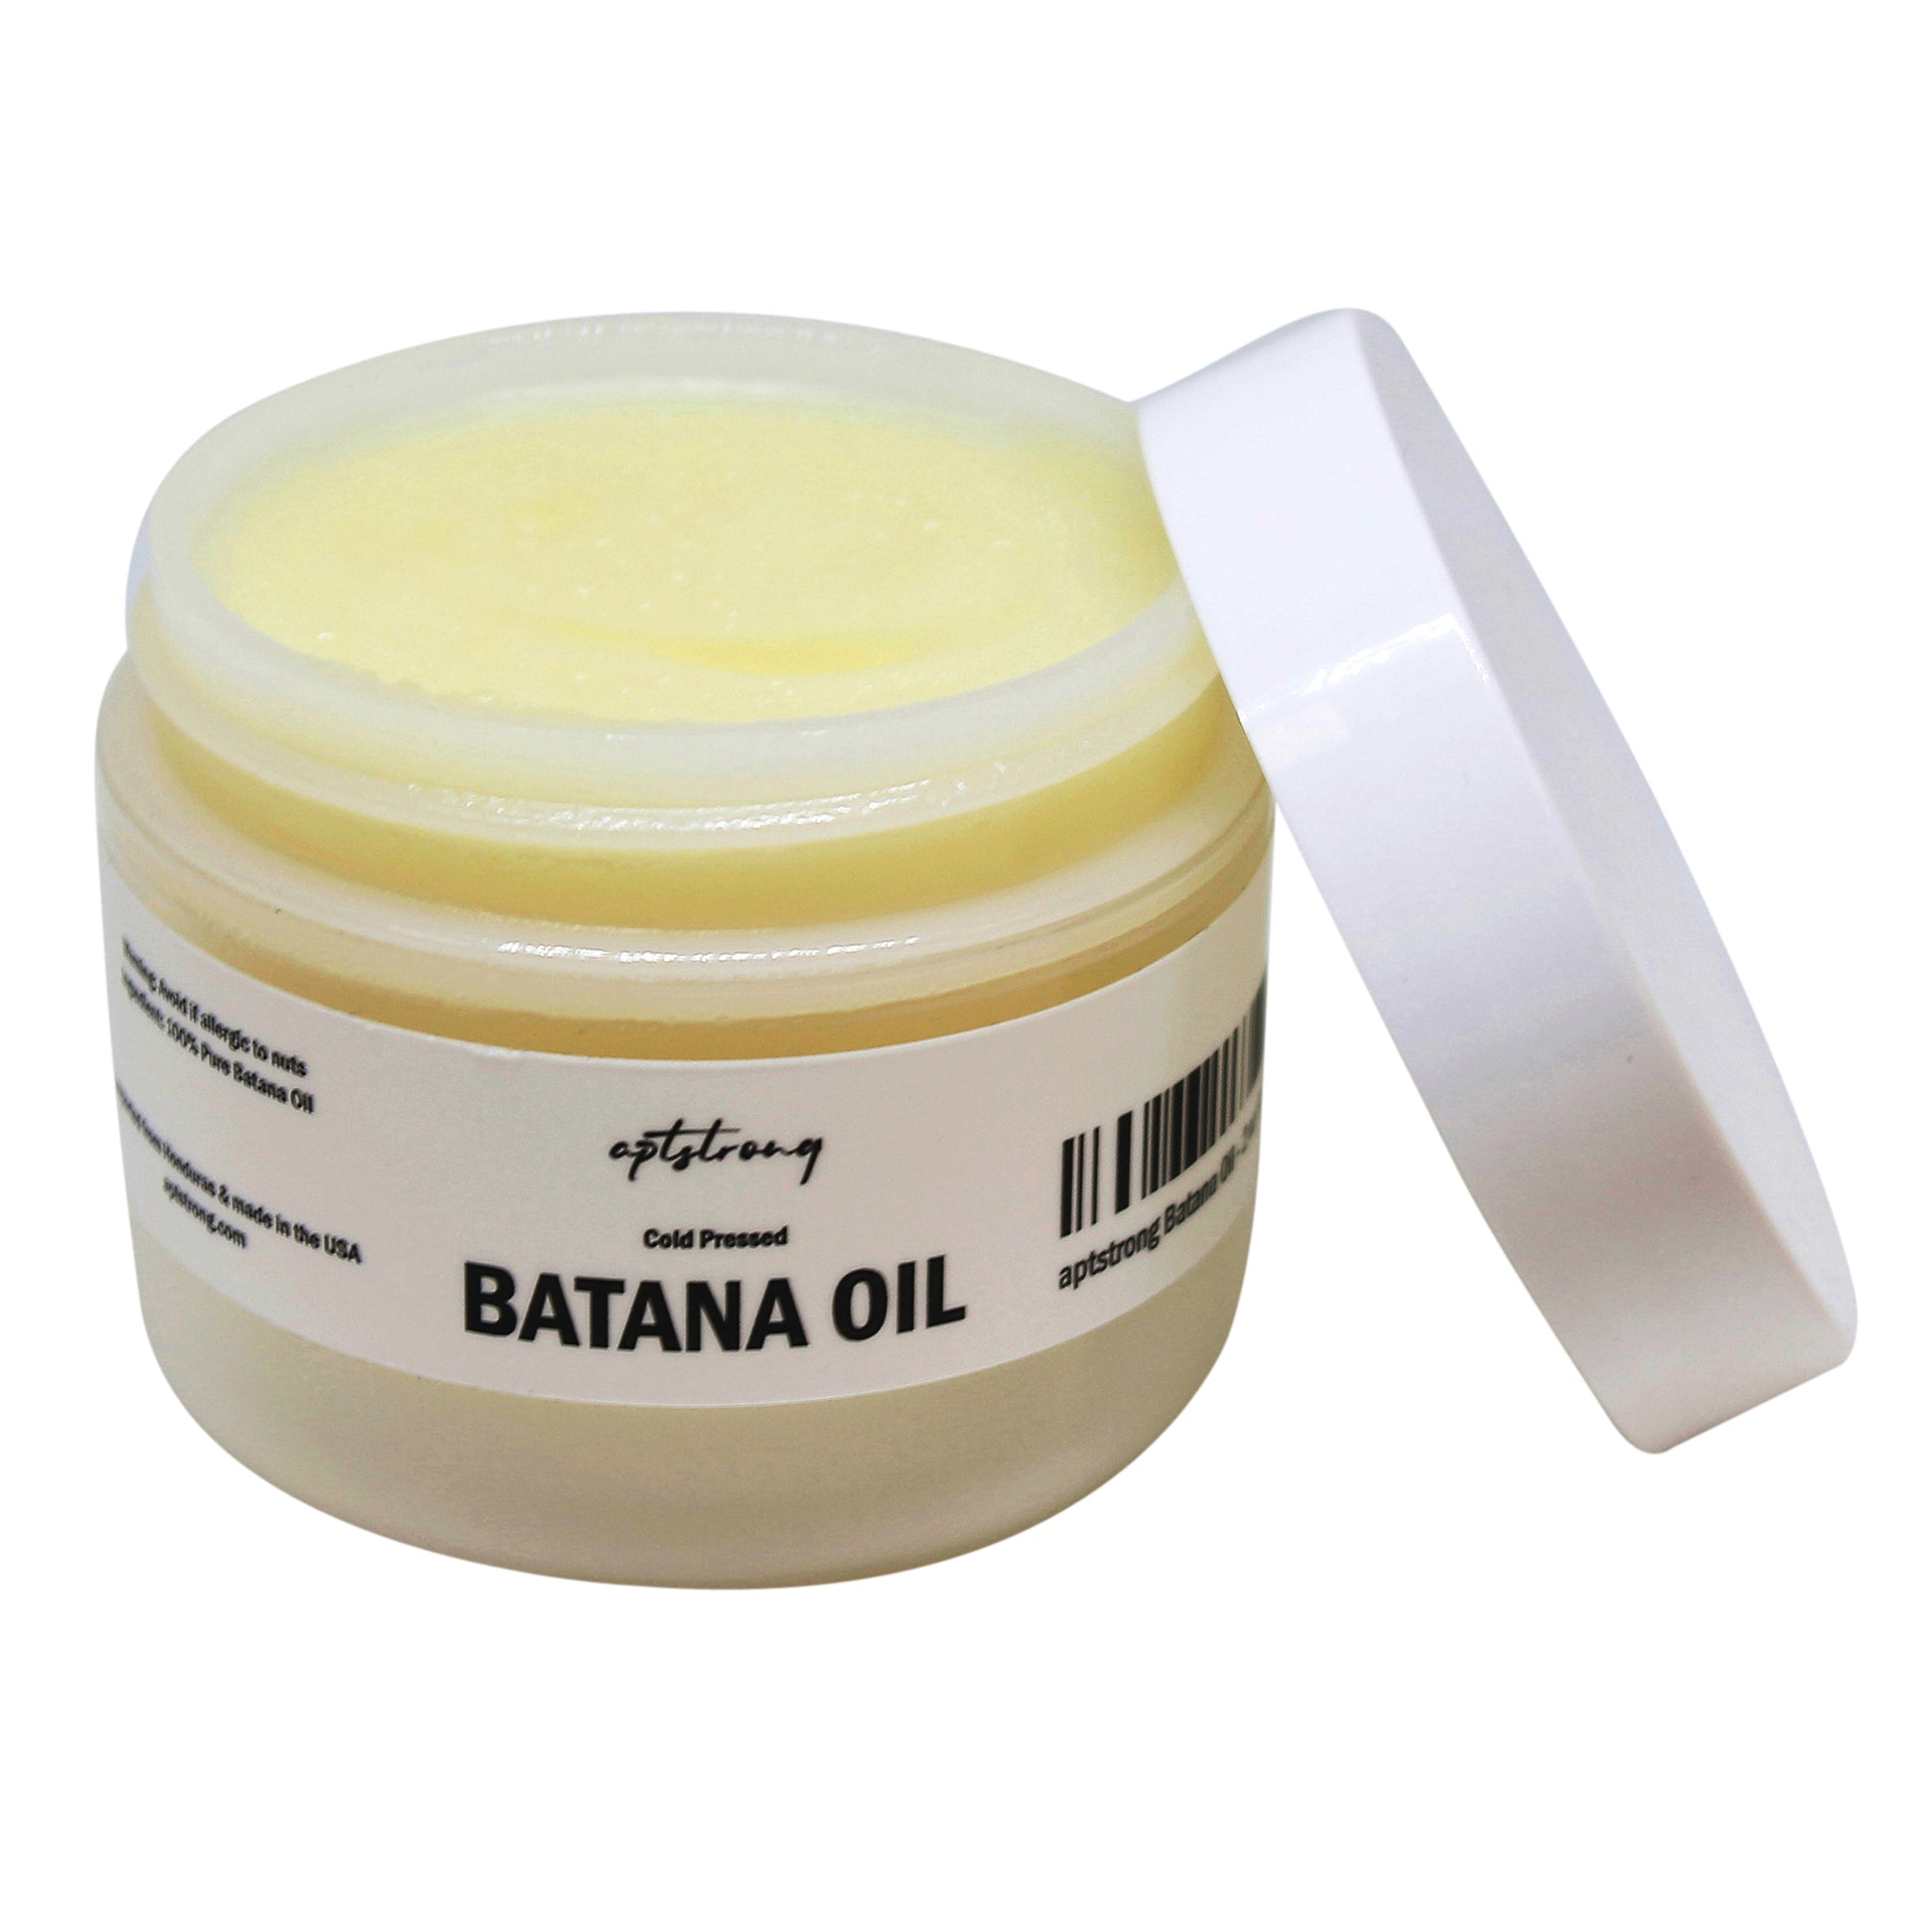 Batana Oil Organic for Hair Growth - Cold Pressed Unrefined Pure – Your Beard Body Curls Eyebrows Nails Scalp Skin - 100% Natural Raw No Burnt Smell - Leave In Travel Size - USA Made from Honduras Seeds